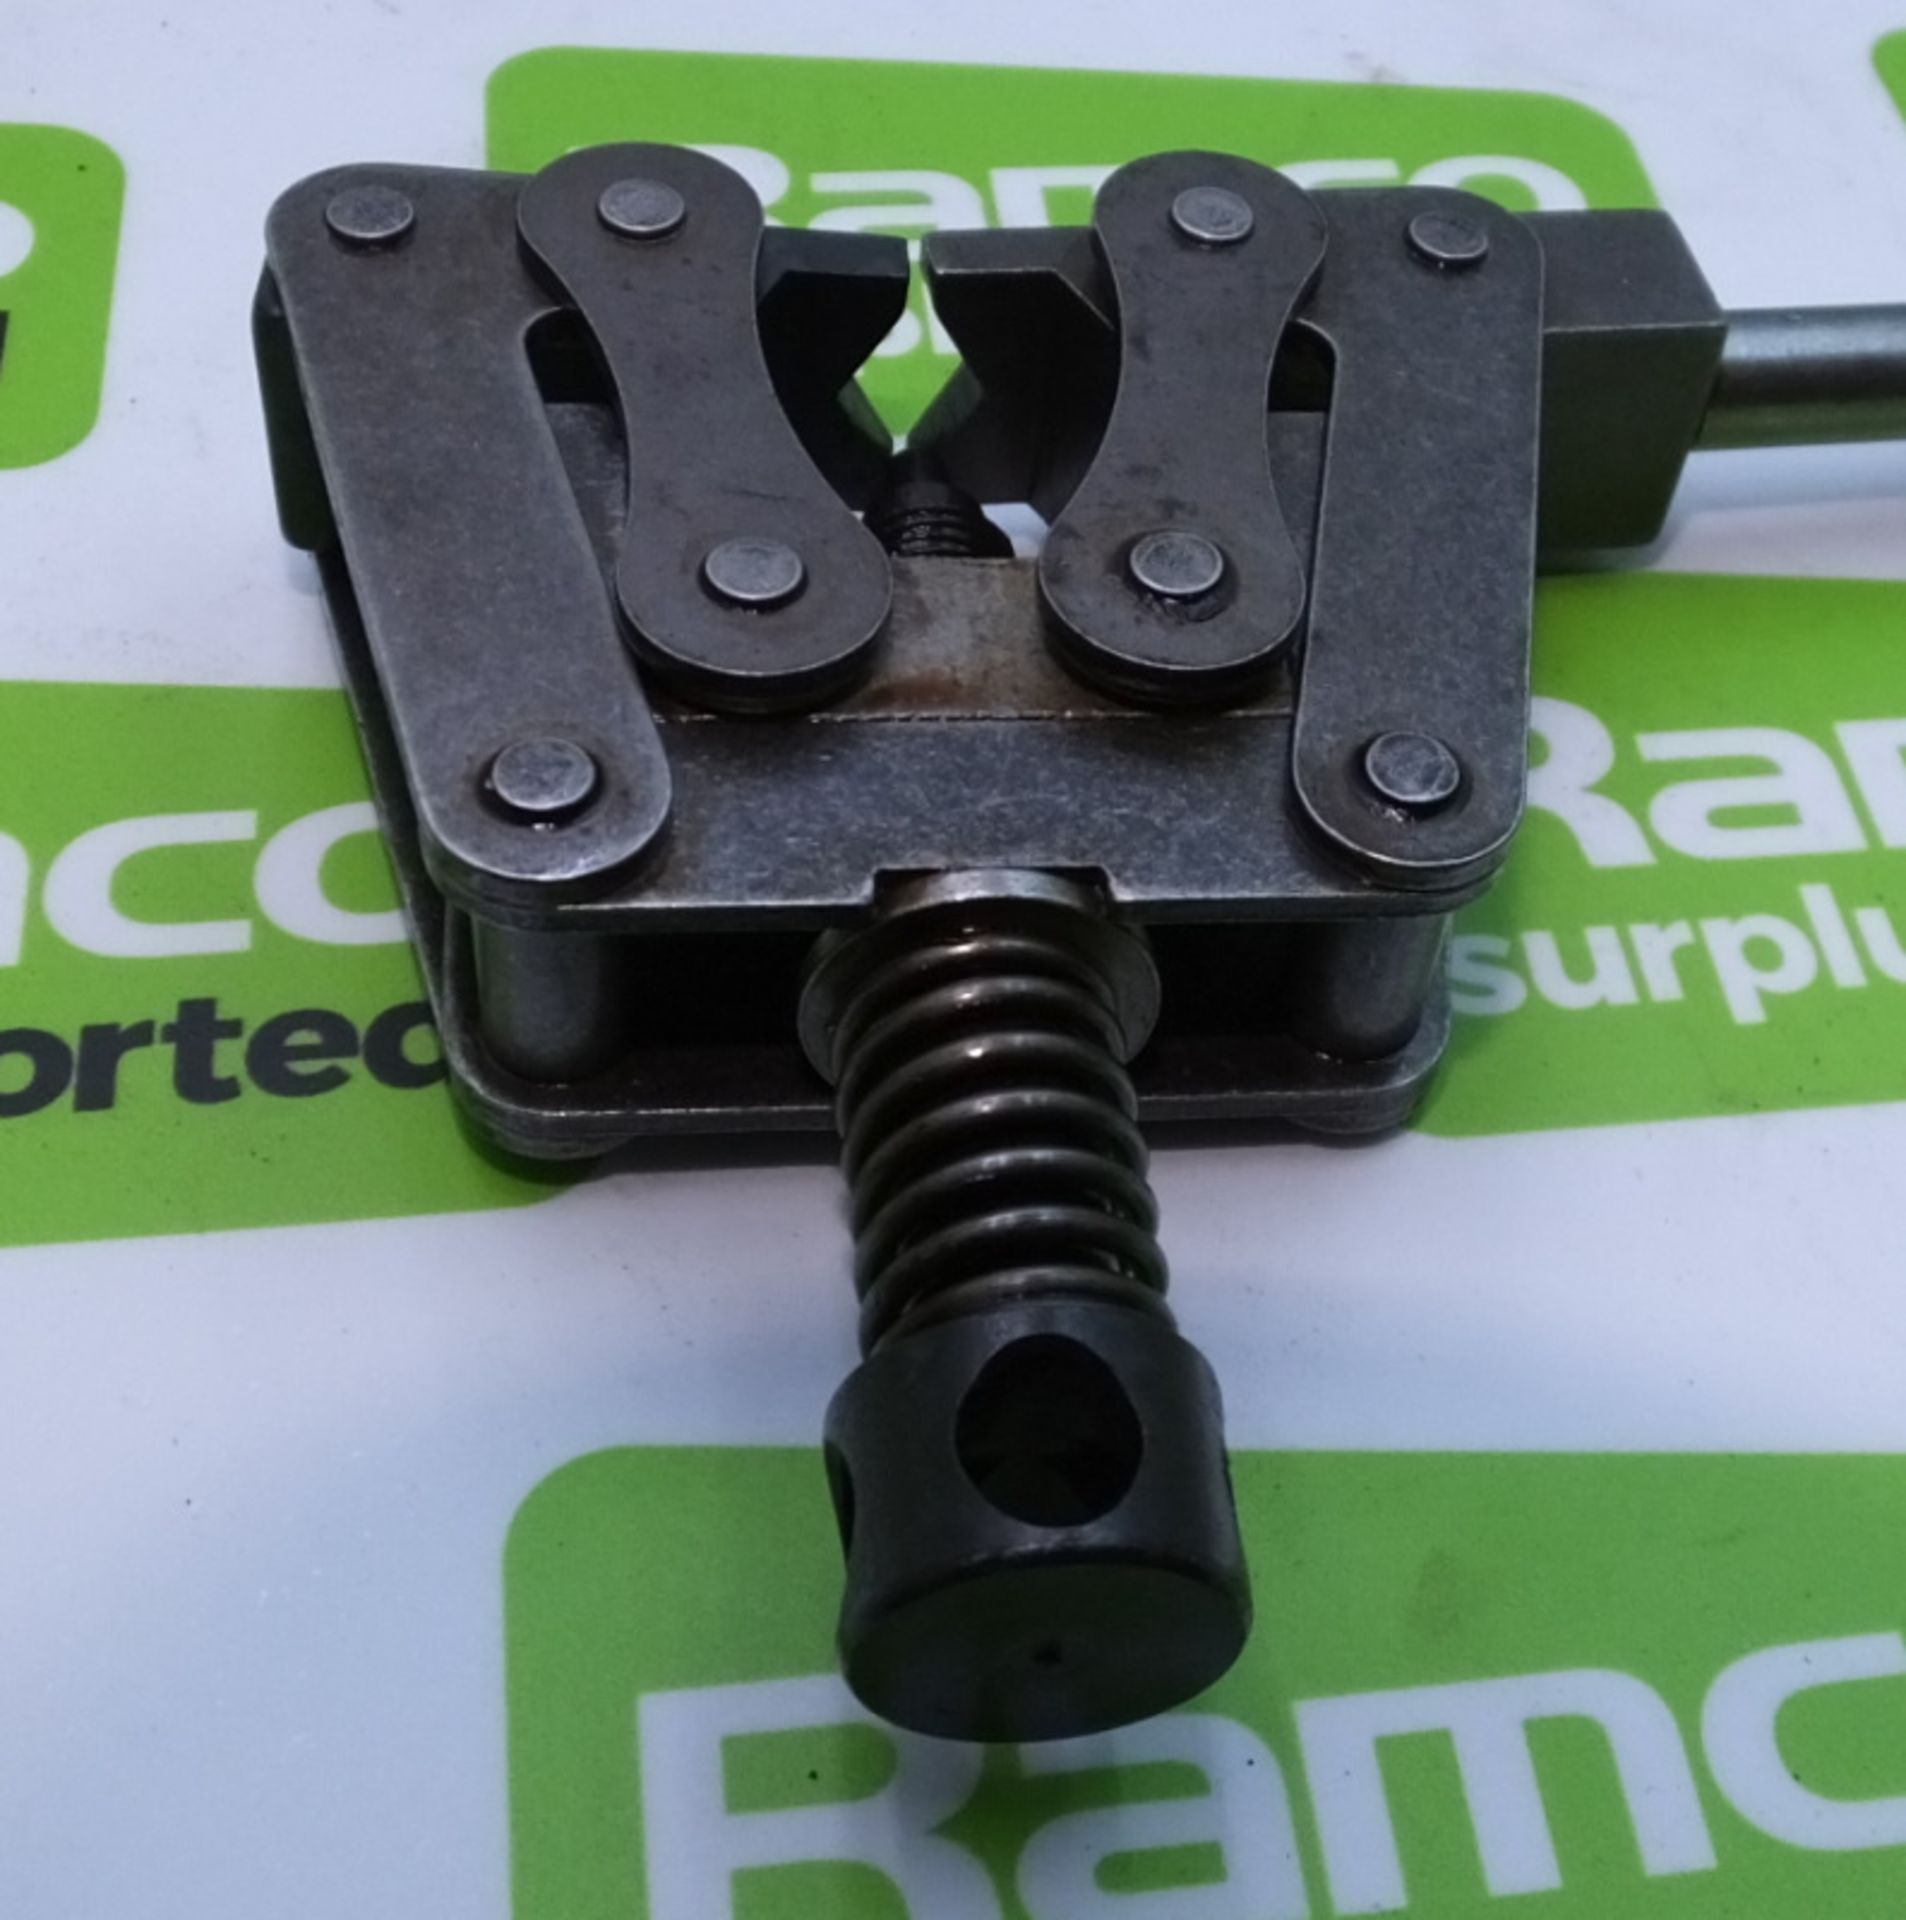 Renolds Chain Bearing Pin Extractor Tool - Image 2 of 2